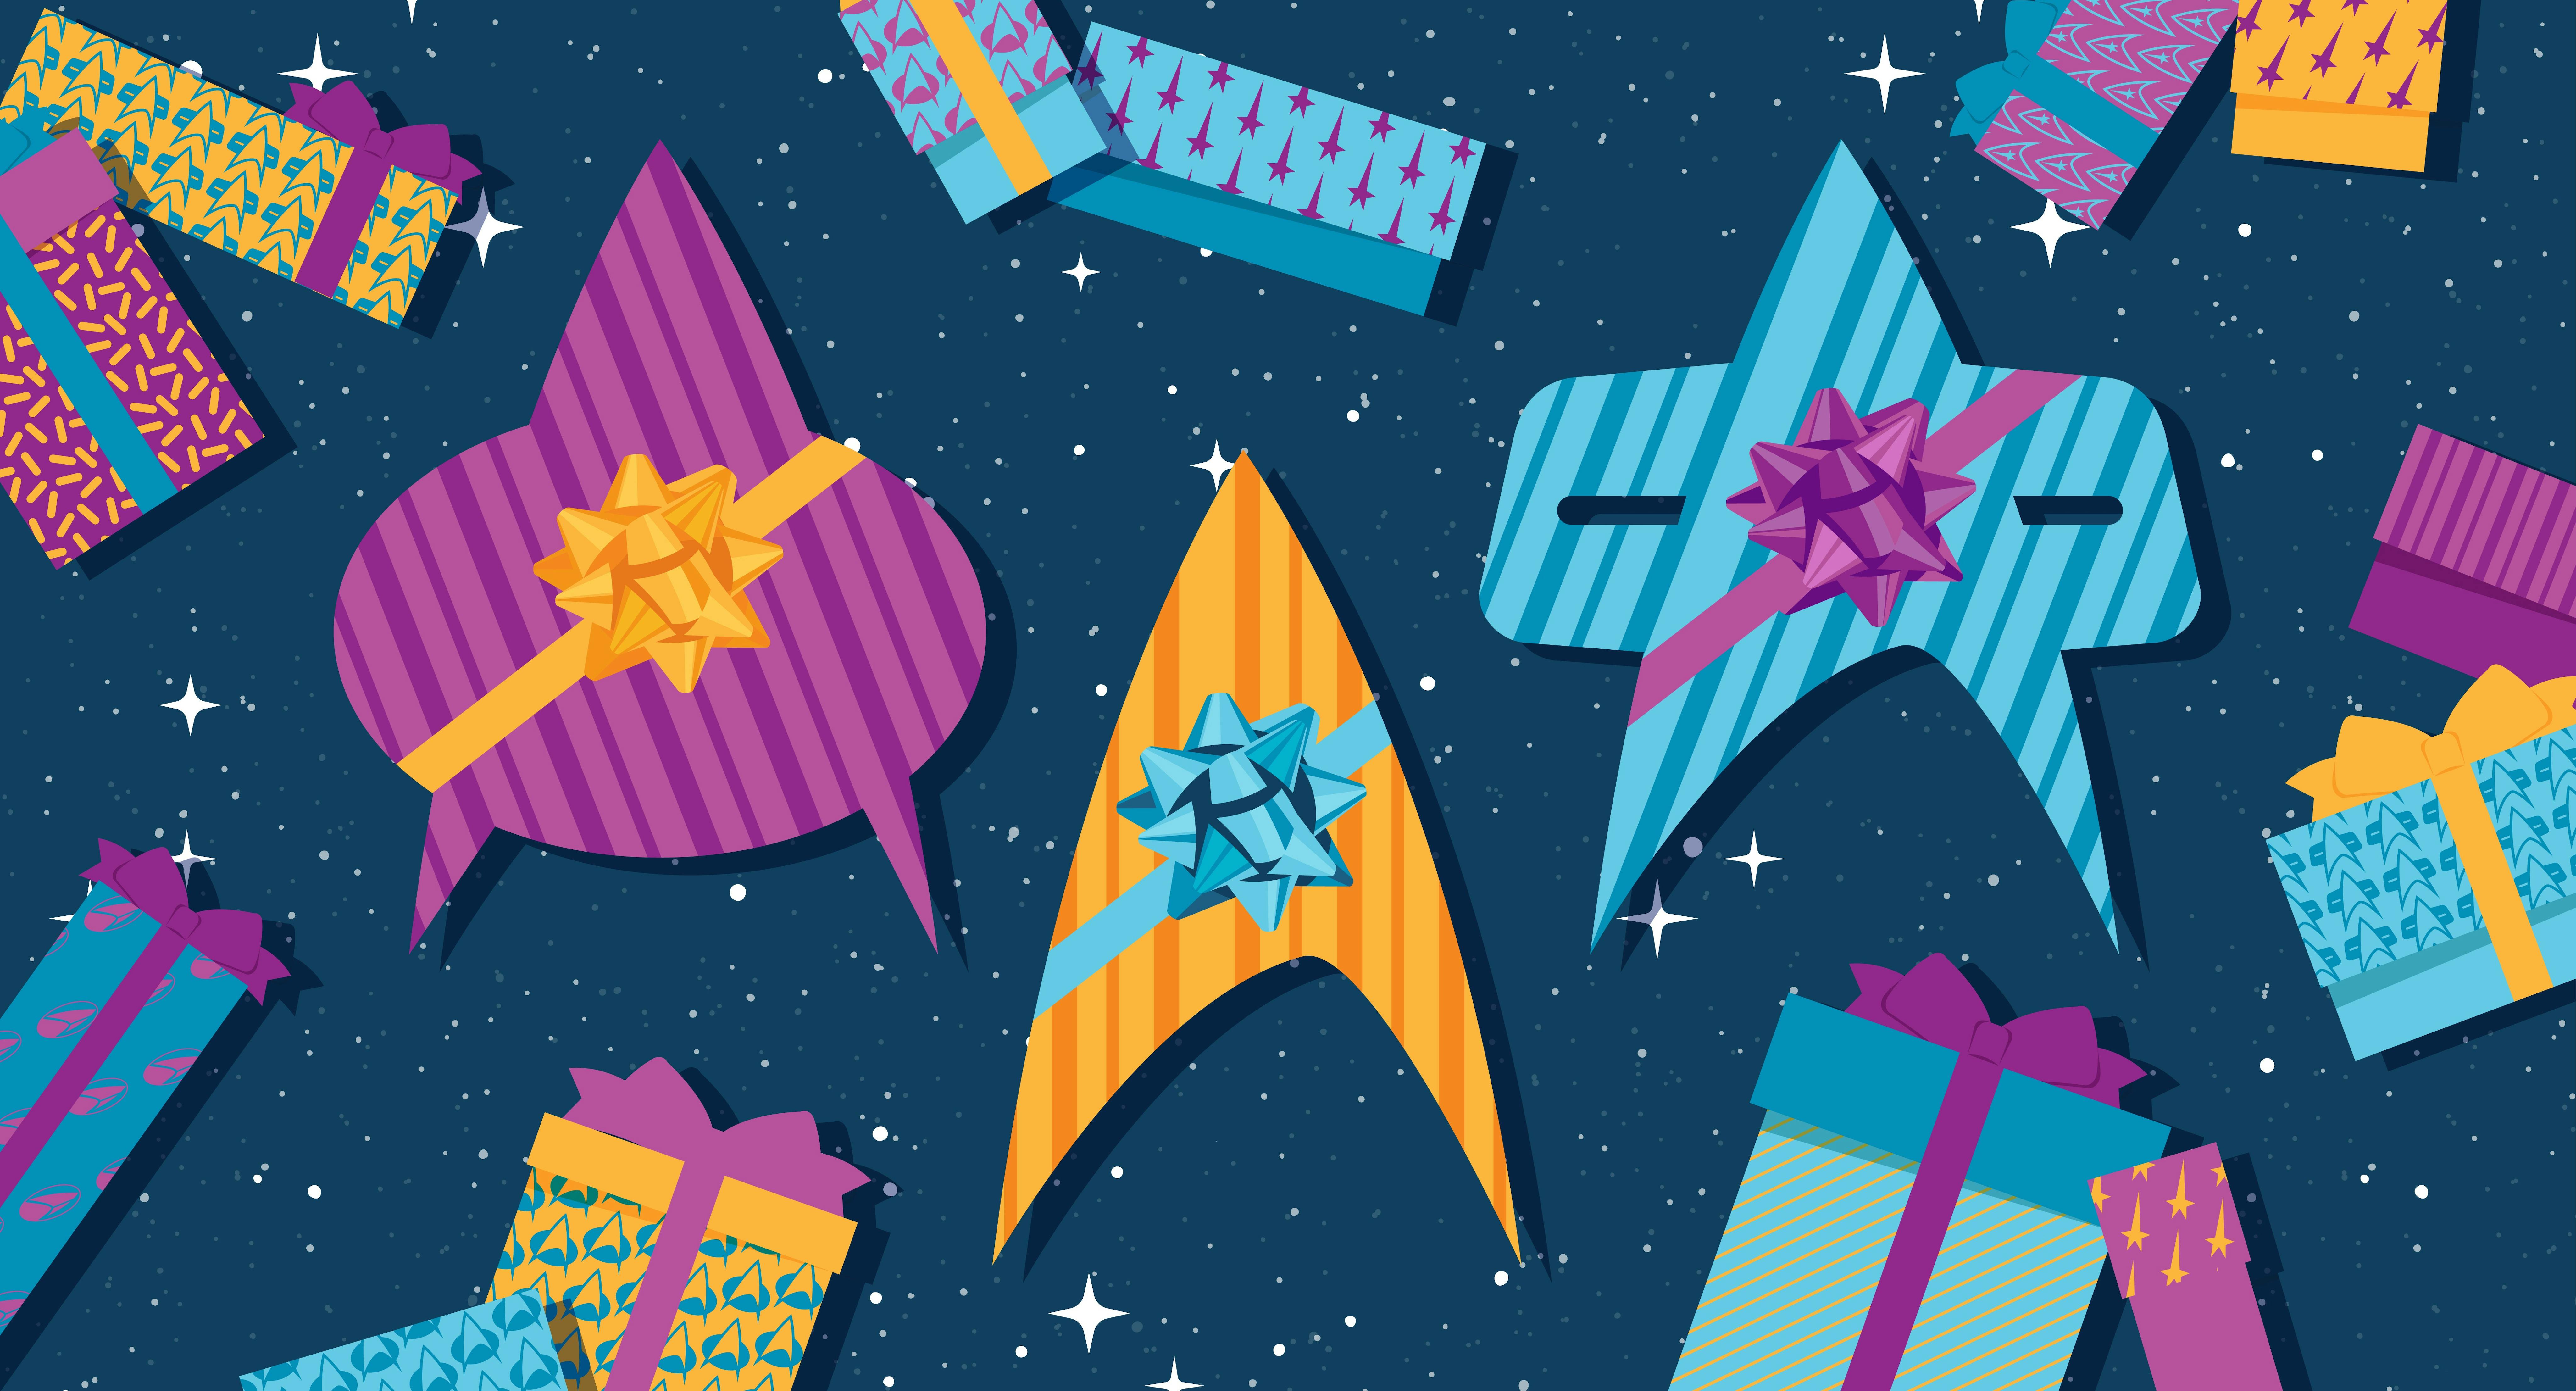 Illustrated banner of Star Trek deltas and gifts with holiday wrapping